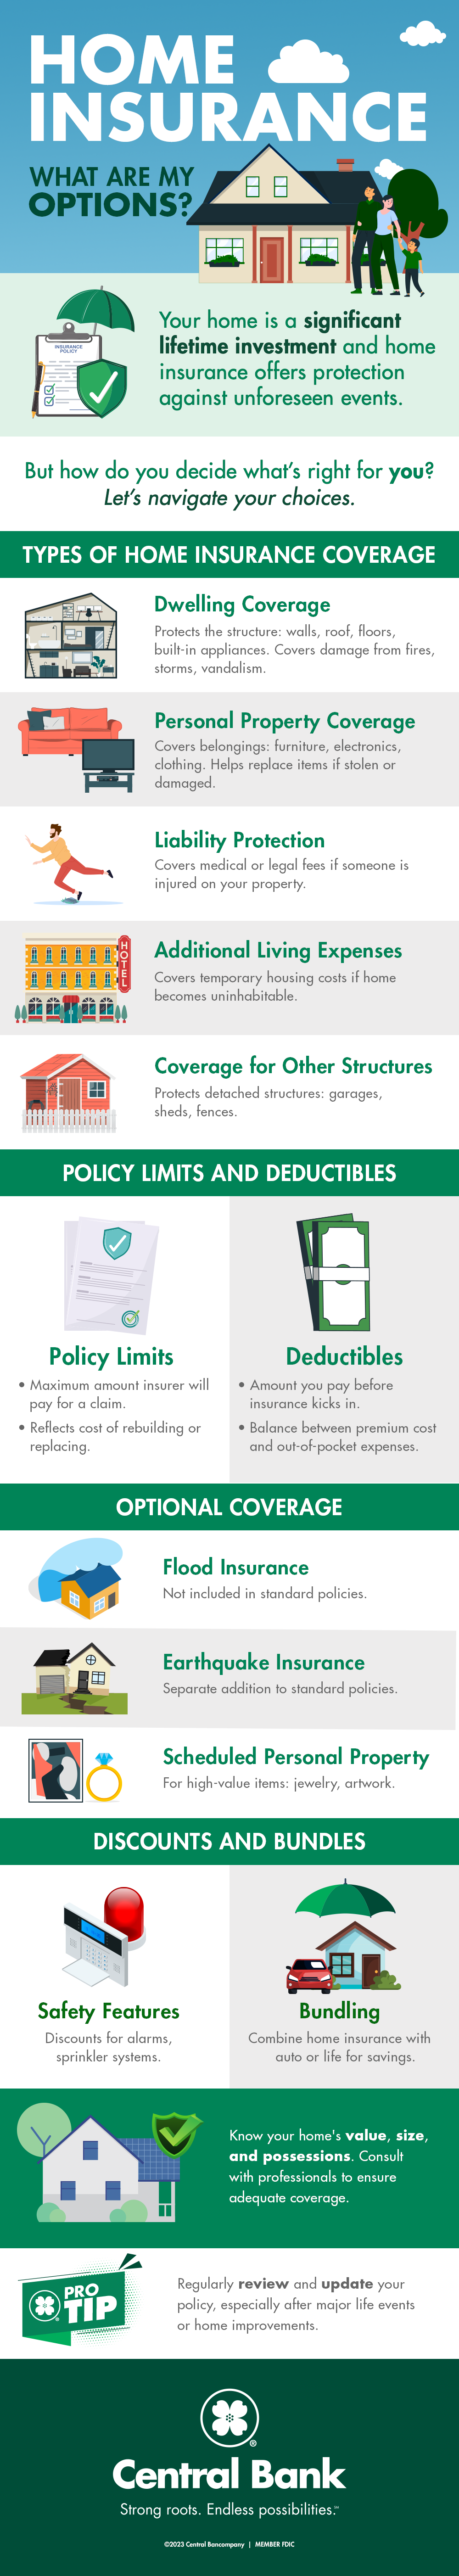 Infographic for Home Insurance